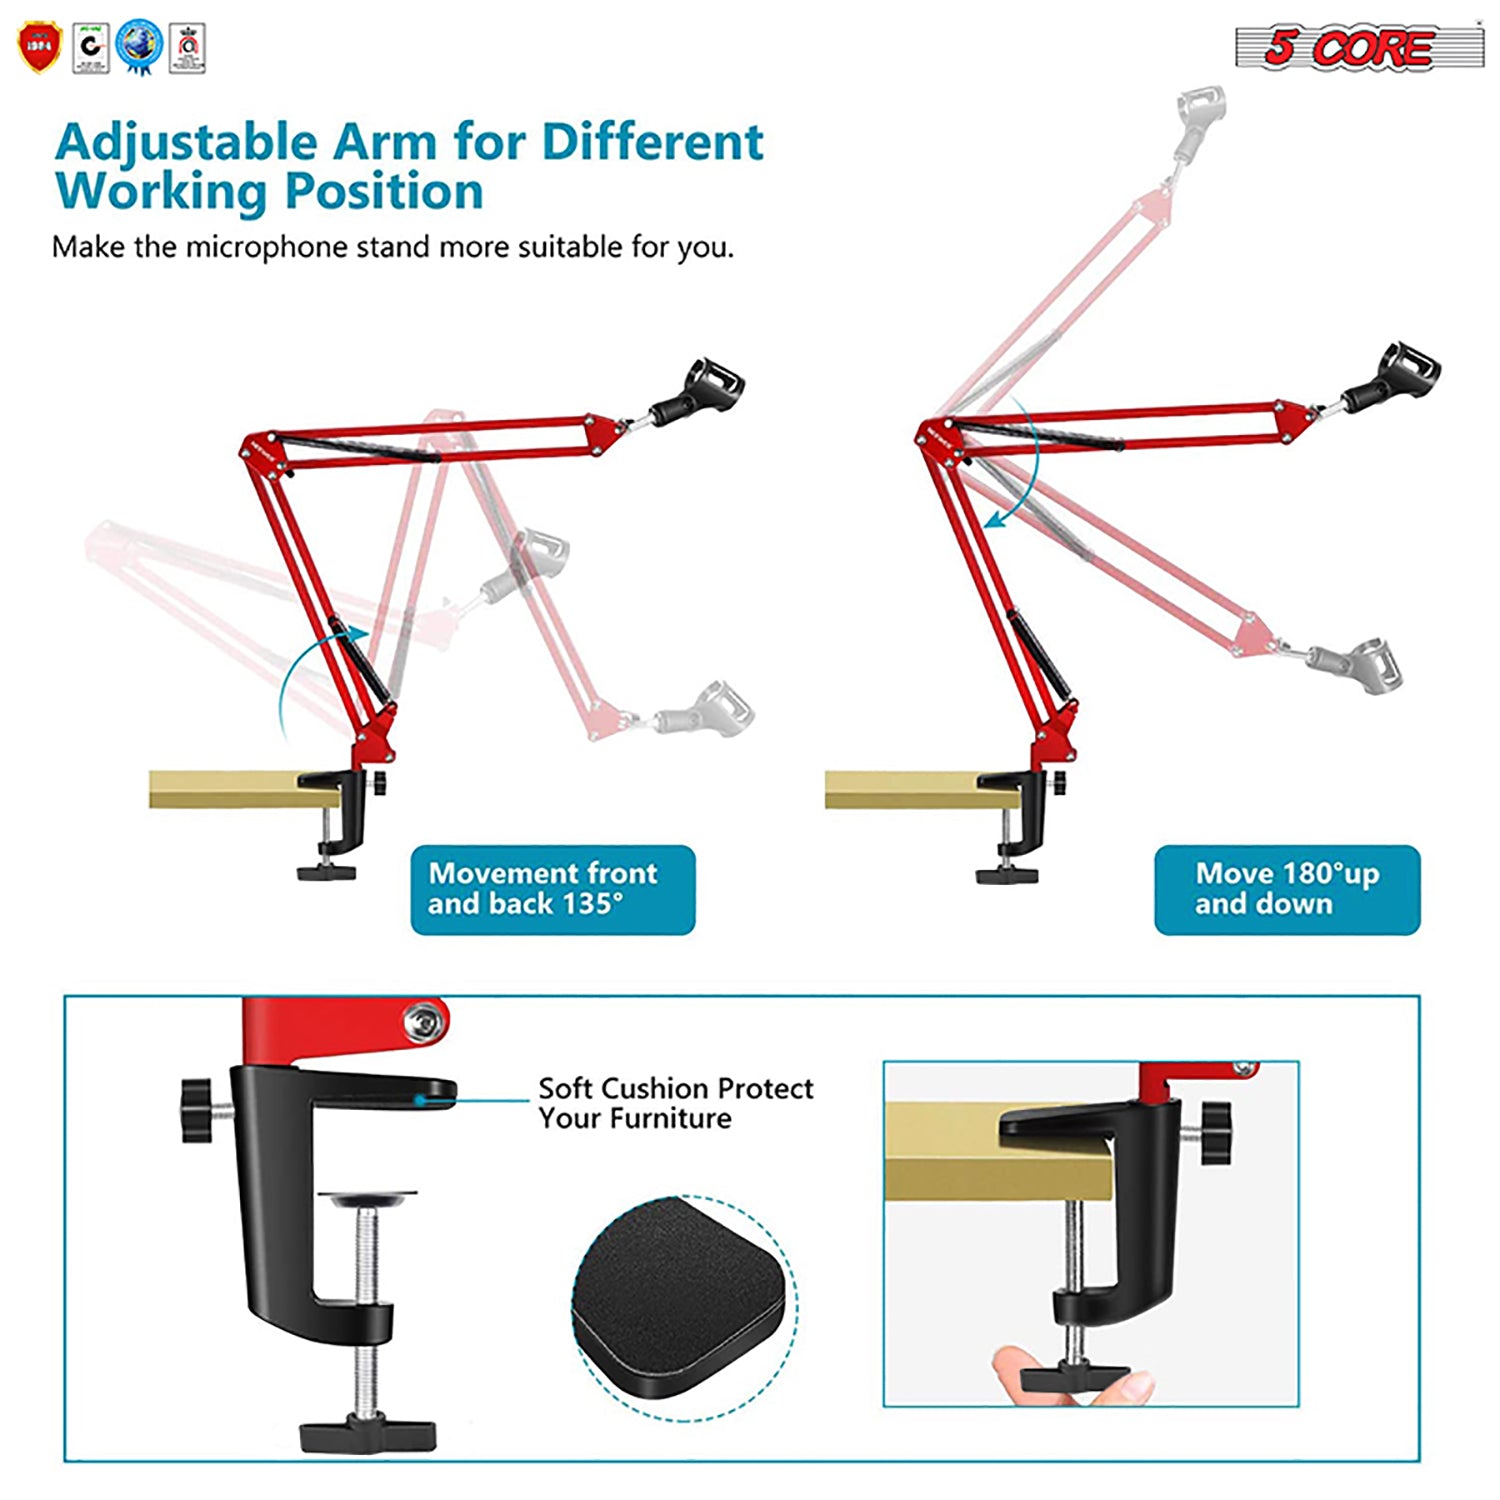 adjustable arm for different working position